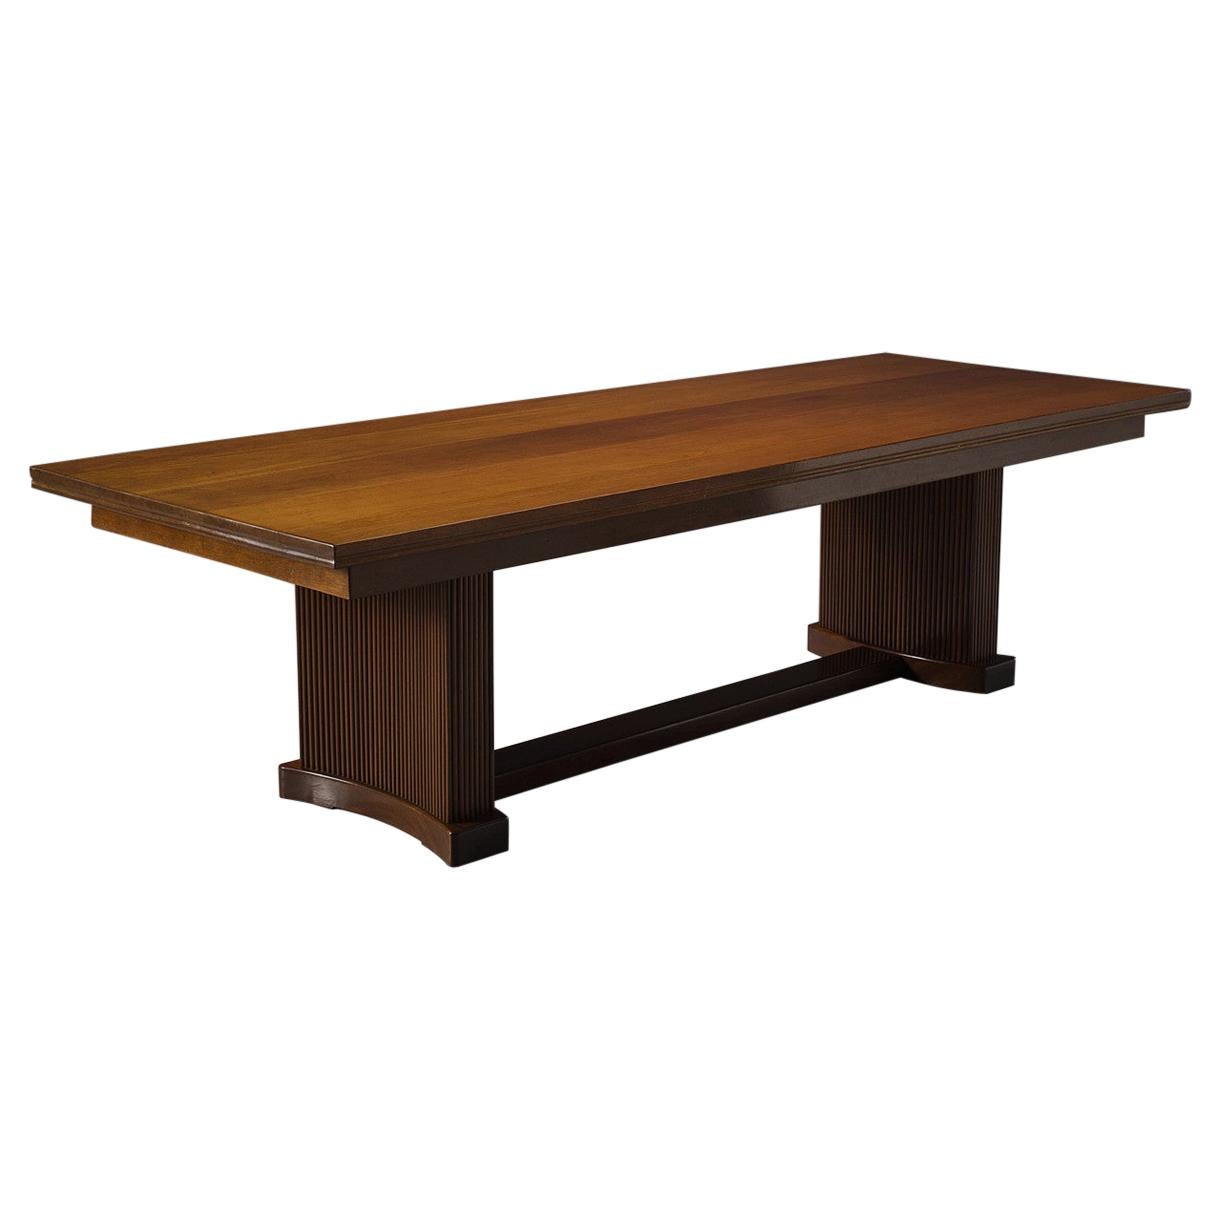 Monumental Danish Conference Table